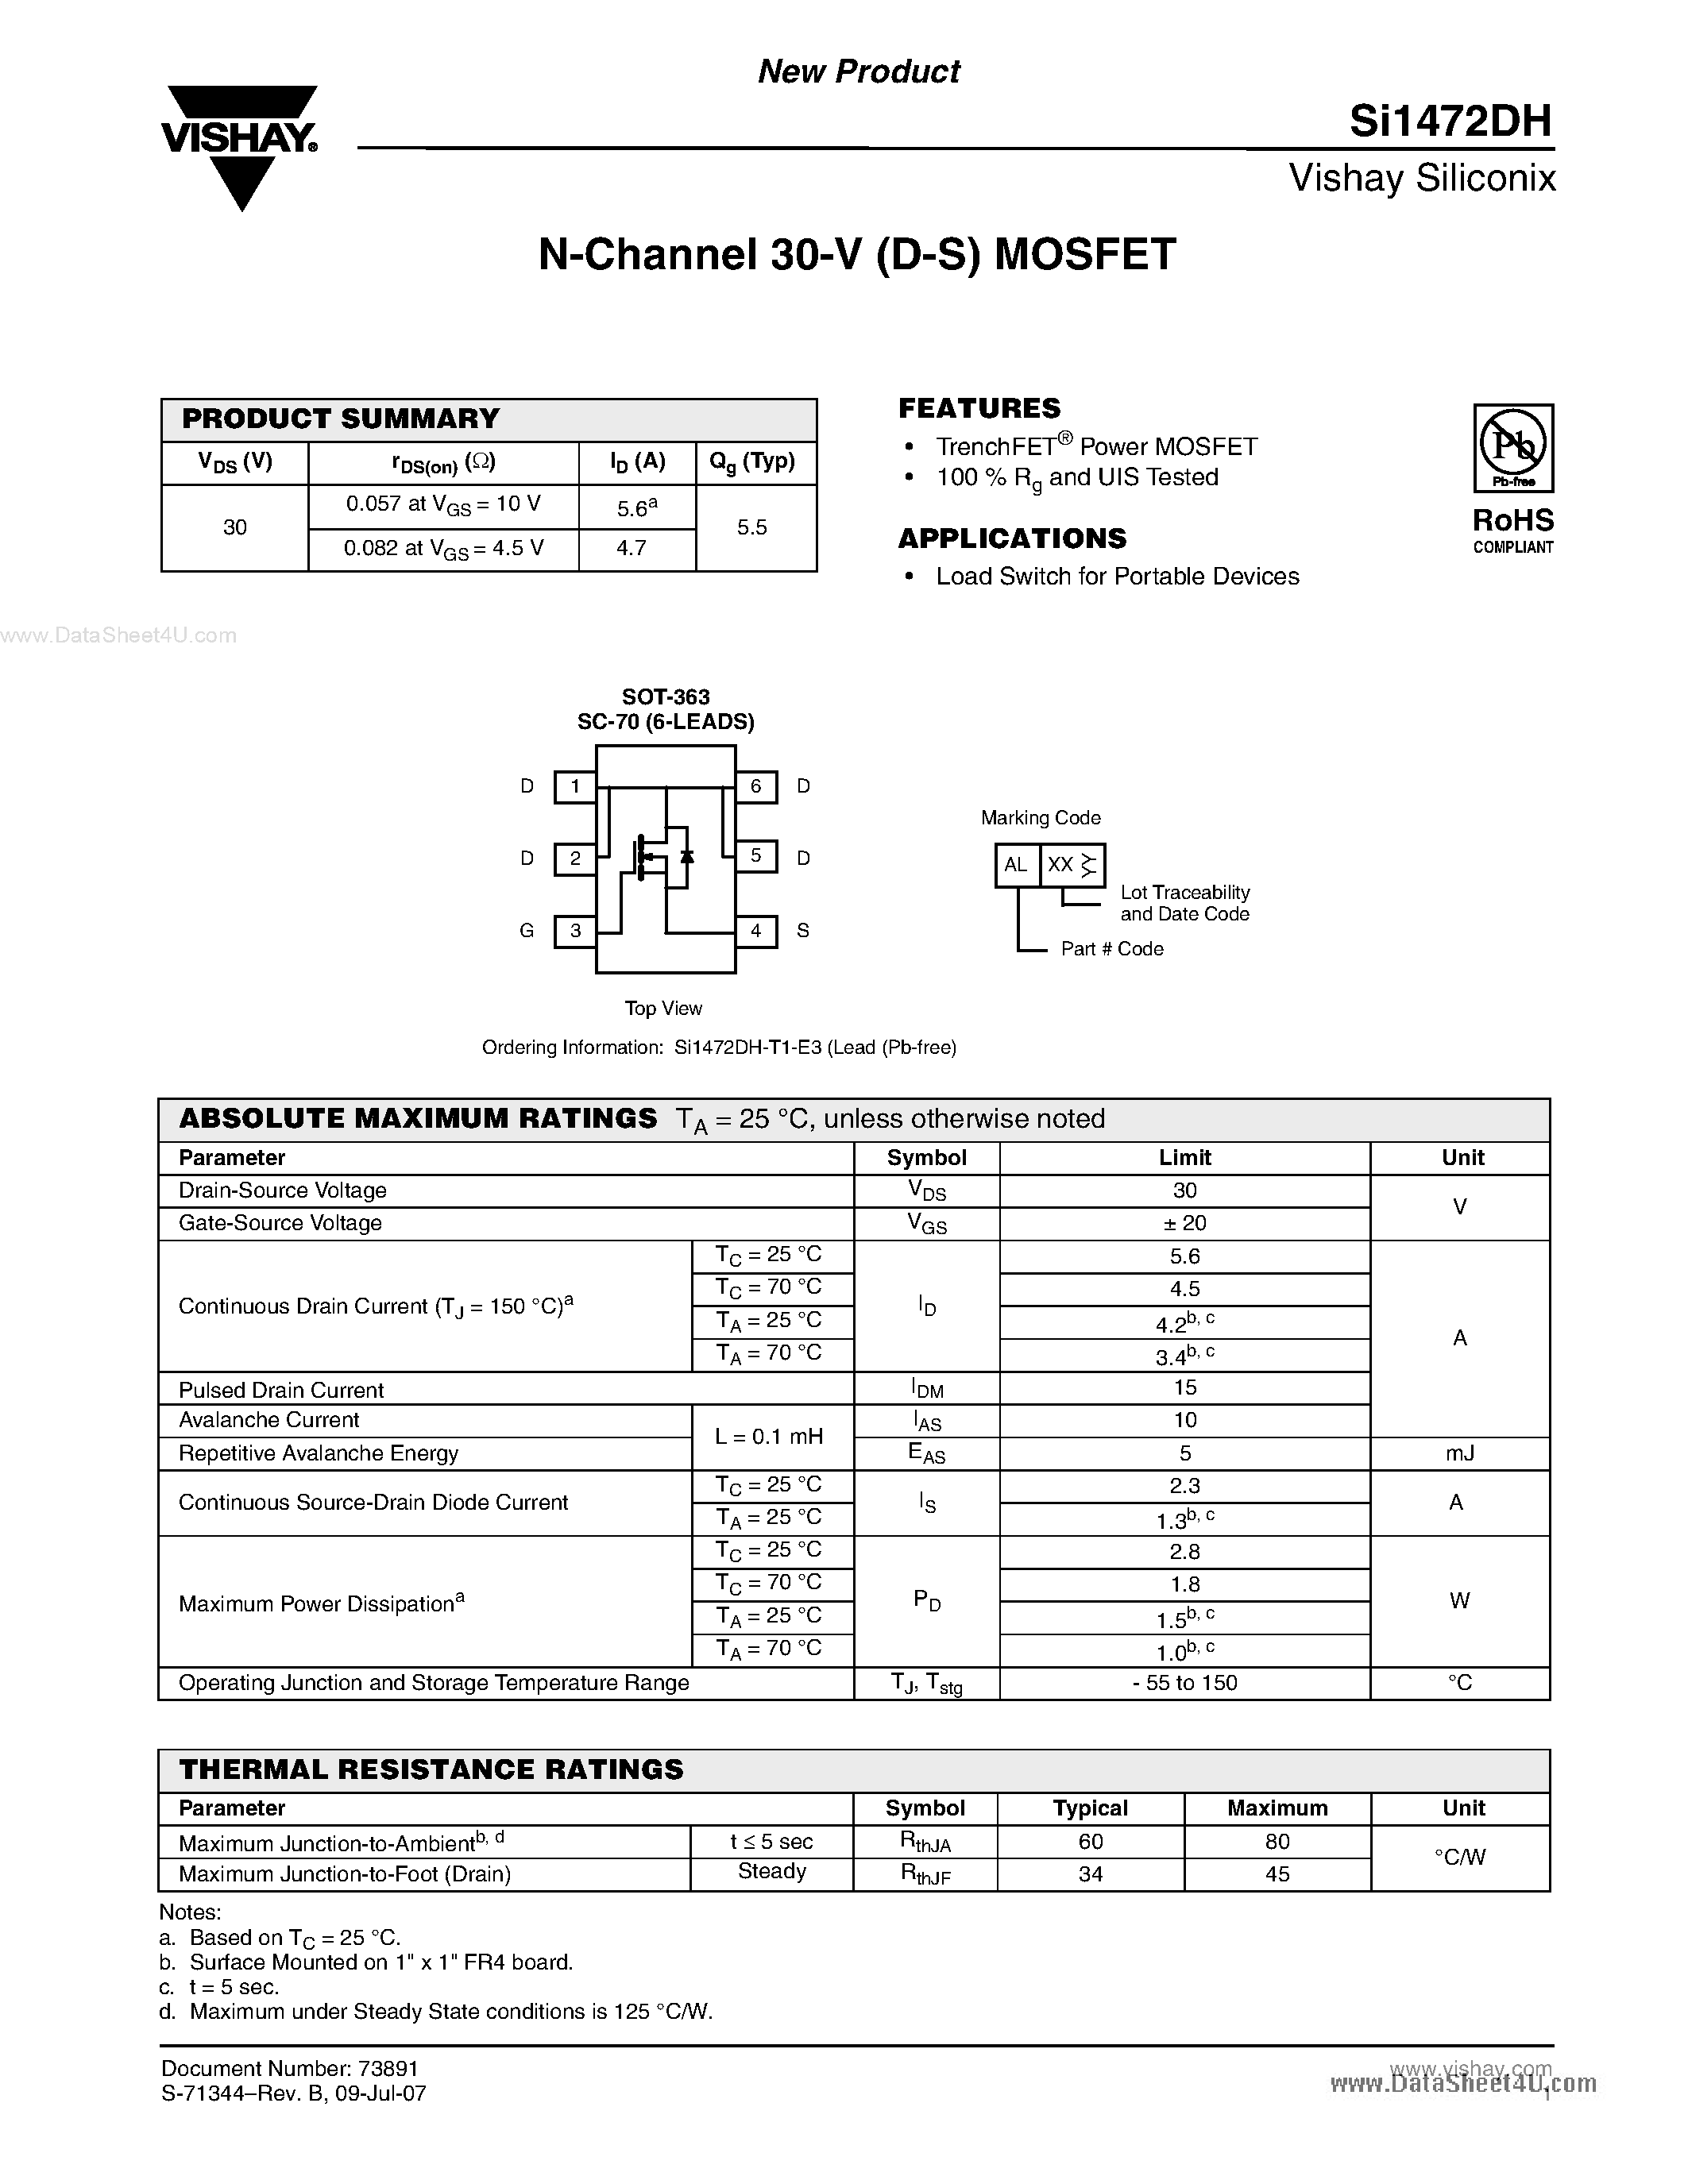 Datasheet SI1472DH - N-Channel MOSFET page 1